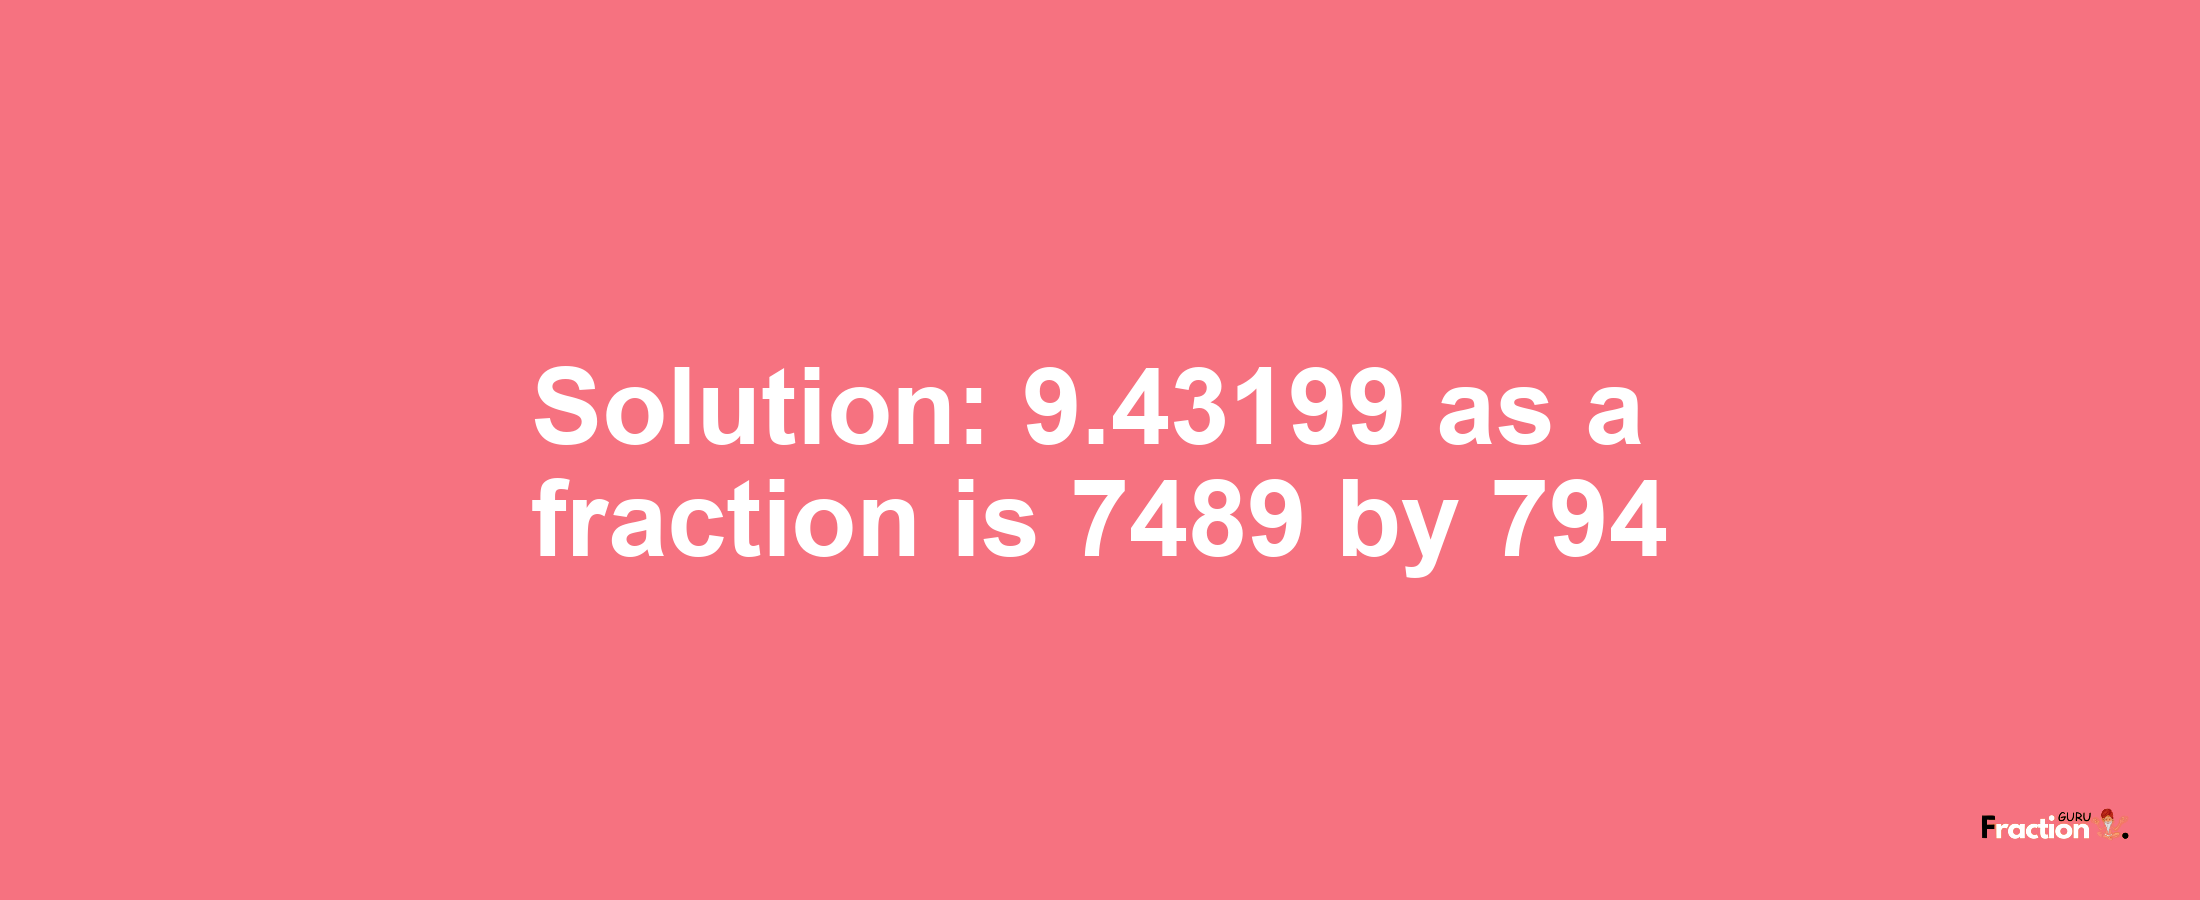 Solution:9.43199 as a fraction is 7489/794